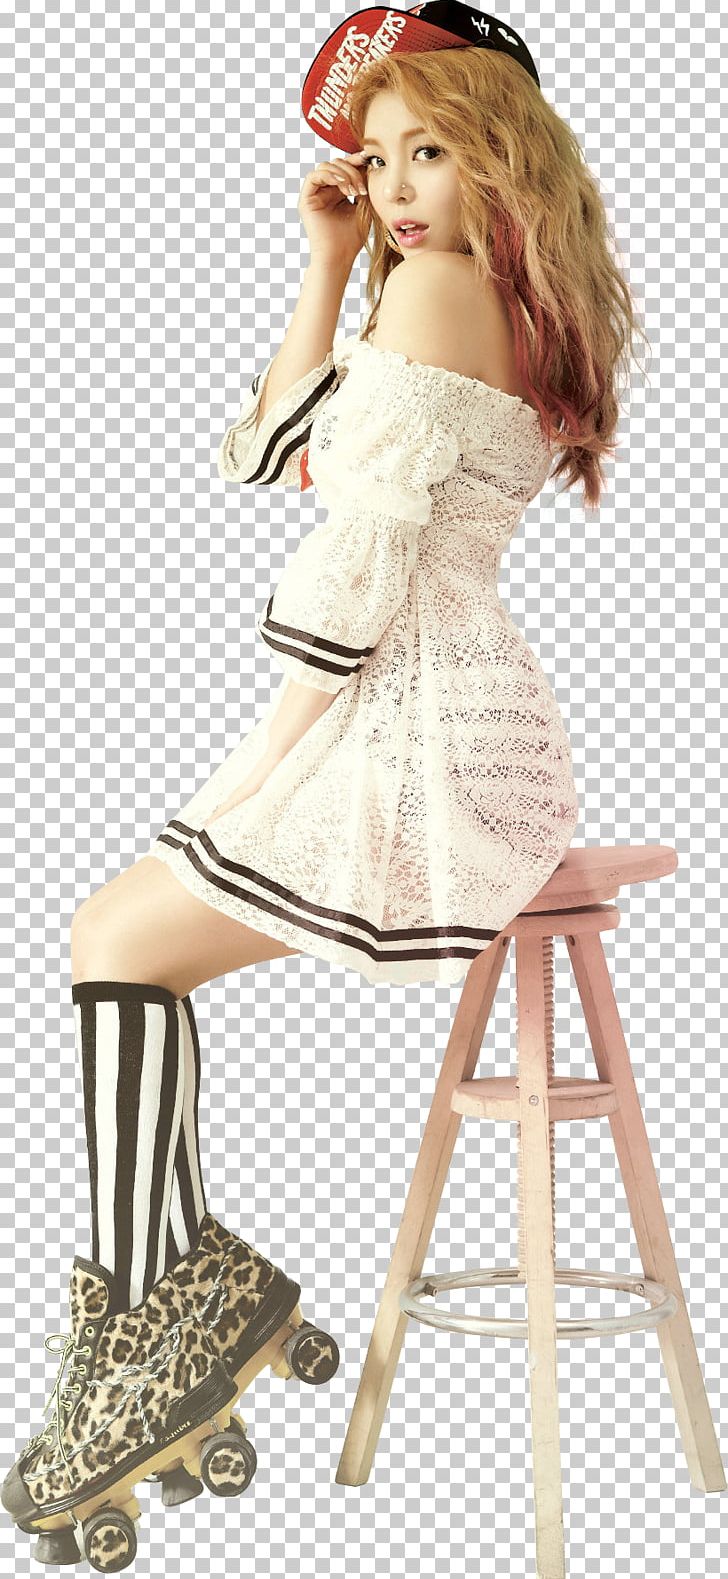 Ailee Rendering Invitation PNG, Clipart, Ailee, Art, Artist, Bambam, Costume Free PNG Download